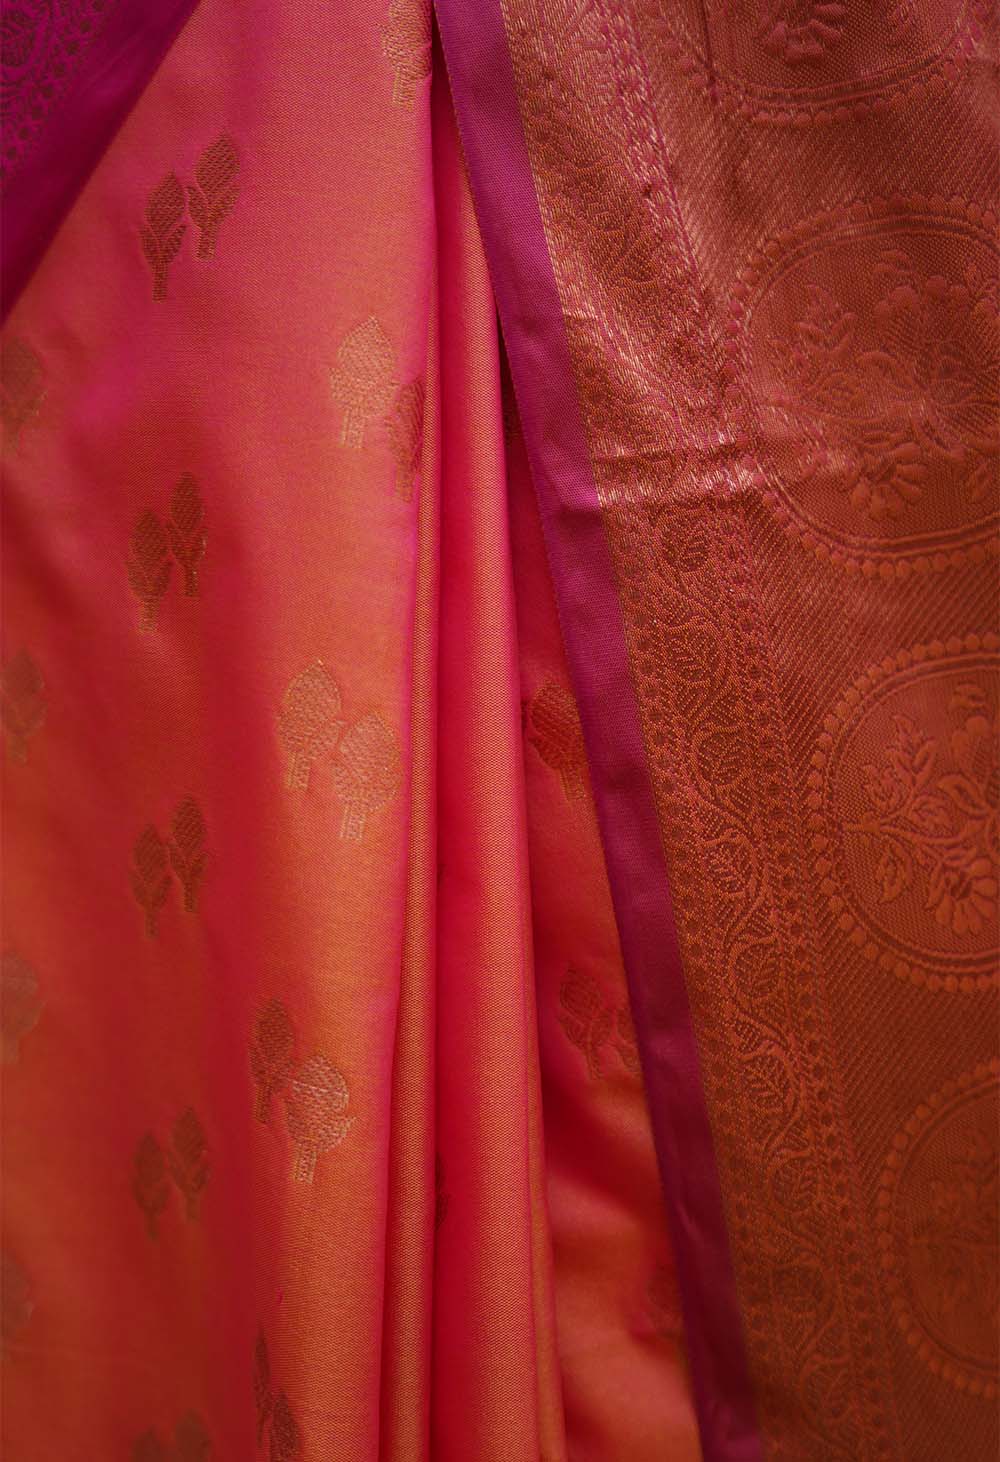 Beautiful Dhoop chaanv effect Zari Butta Overall And Pink Broad Bordered Ornate Palla With Tassels Ready To Wear Saree